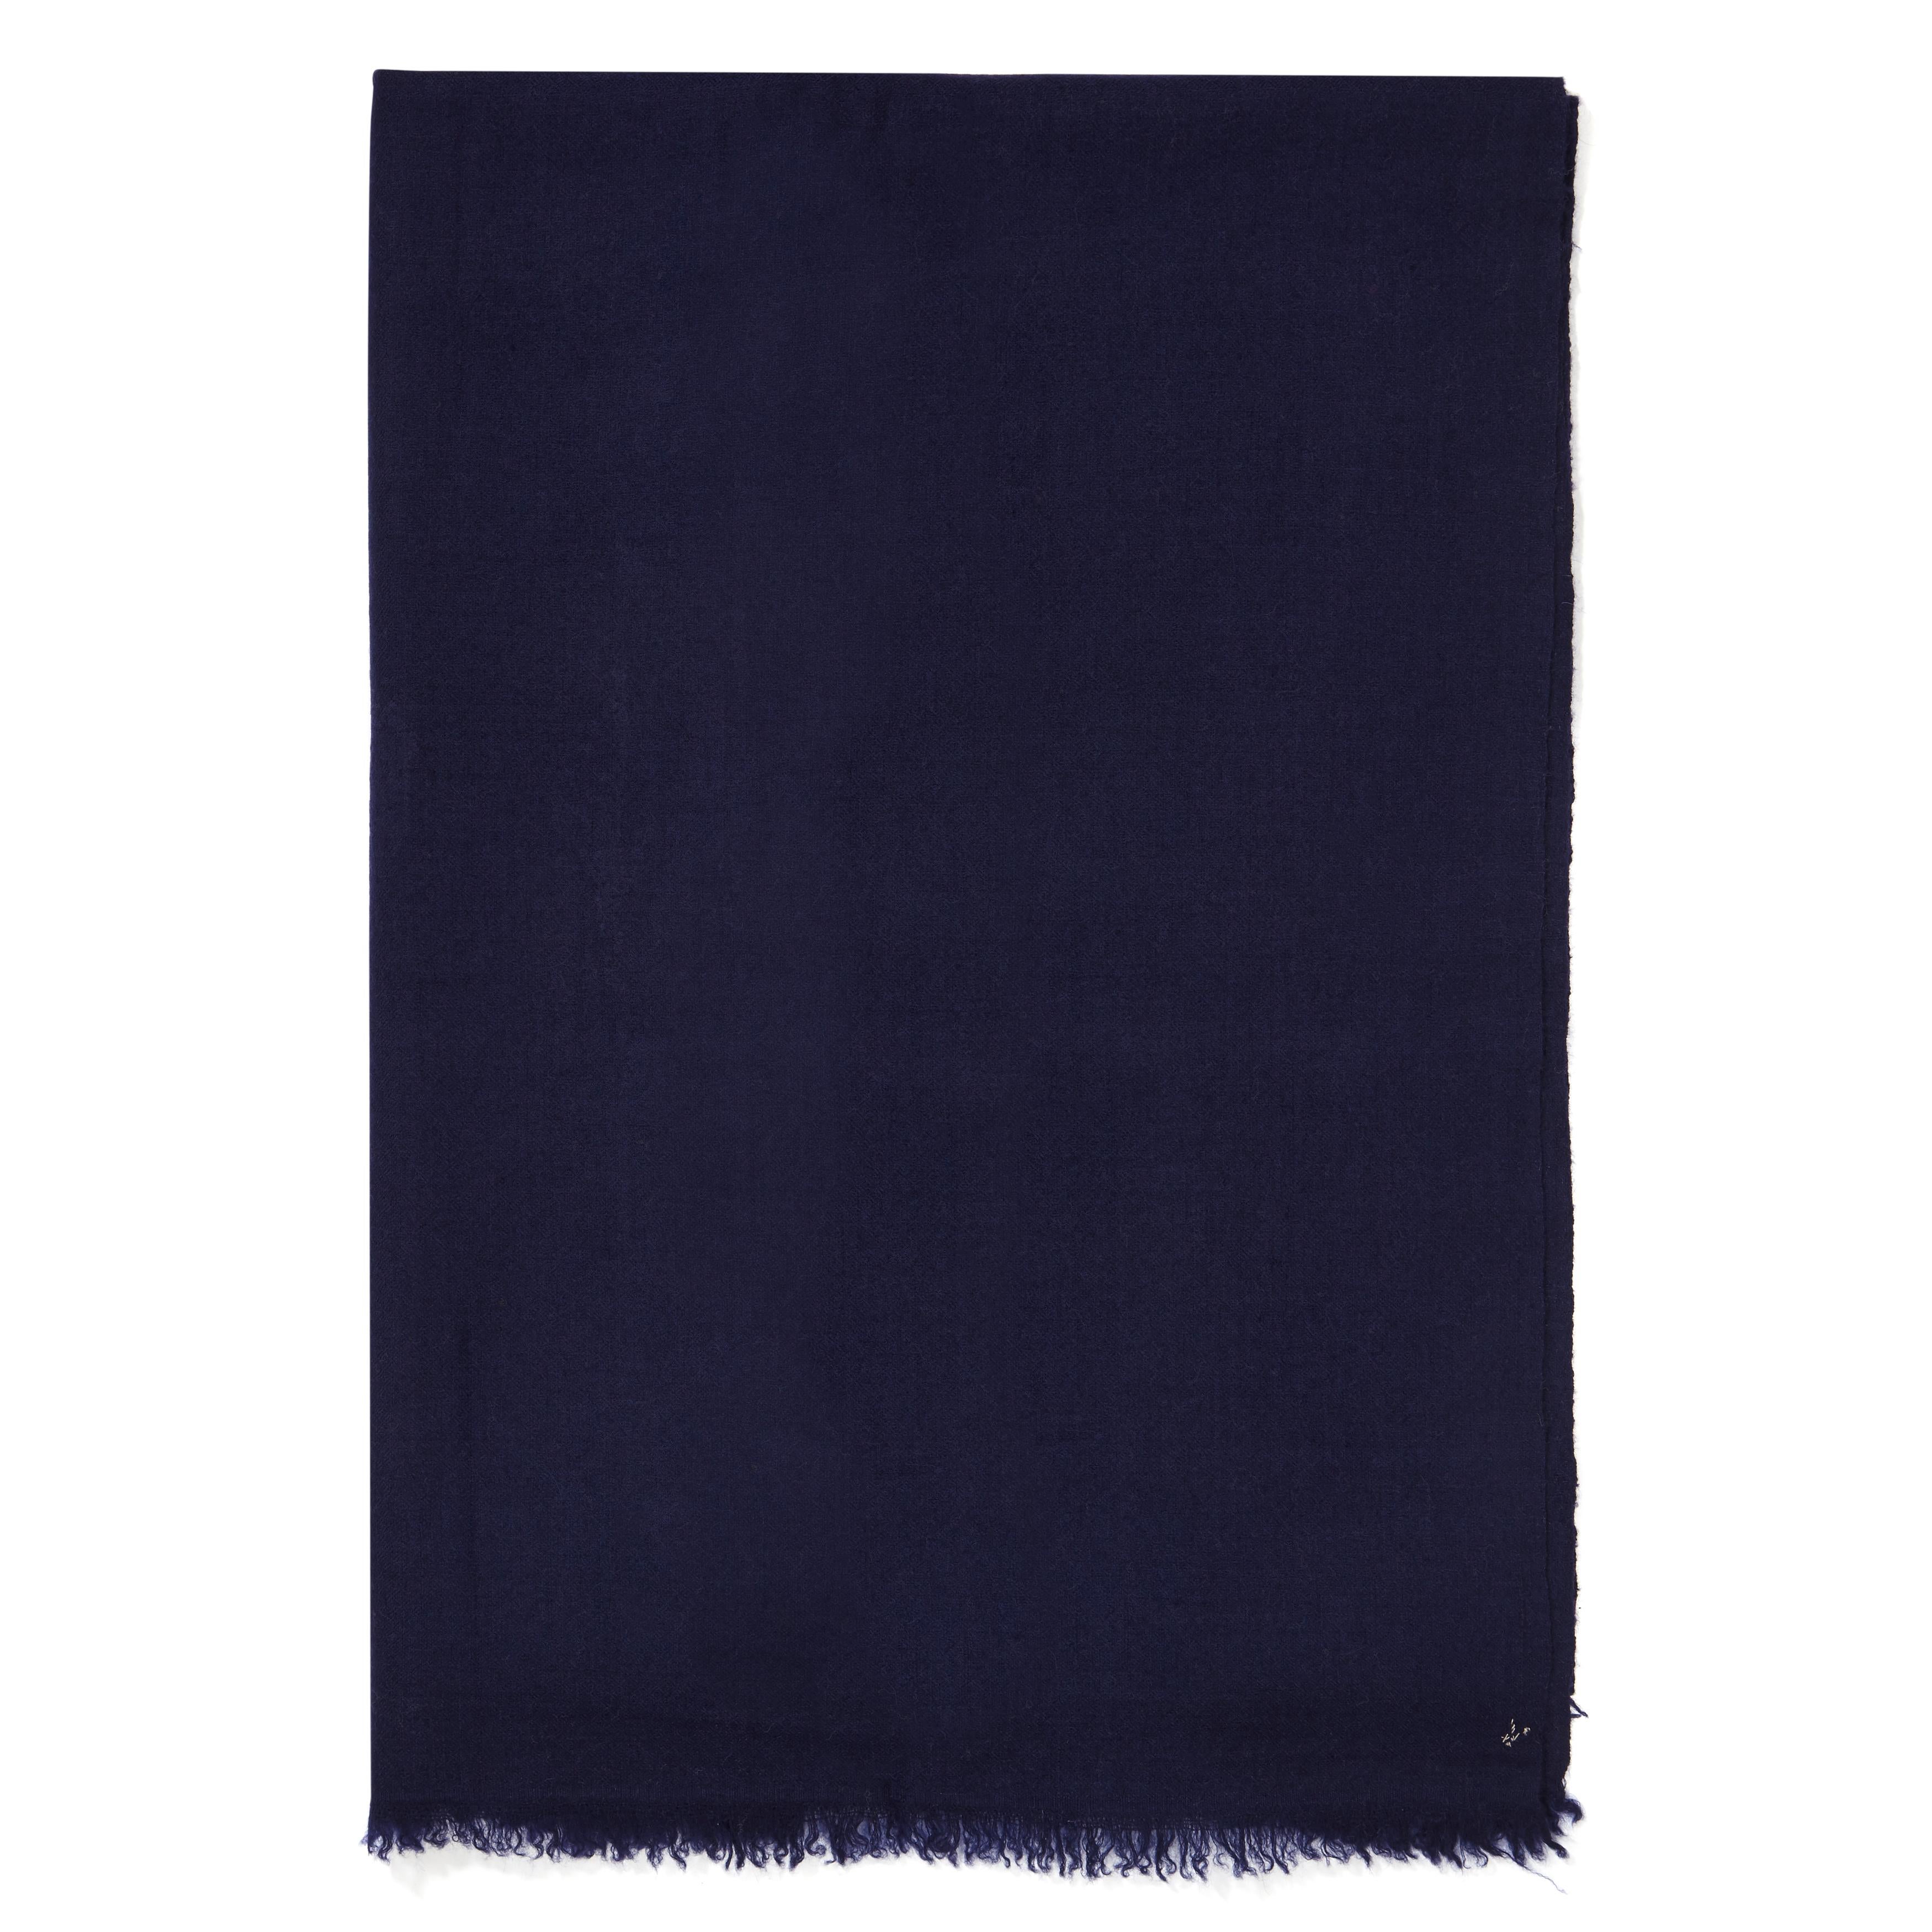 Large Handwoven 100% Cashmere Scarf in Navy made in Kashmir India - Brand New 

Verheyen London’s shawl is spun from the finest handwoven cashmere from Kashmir.  Each one has been signed by hand by the person who made it. 
Its warmth envelopes you